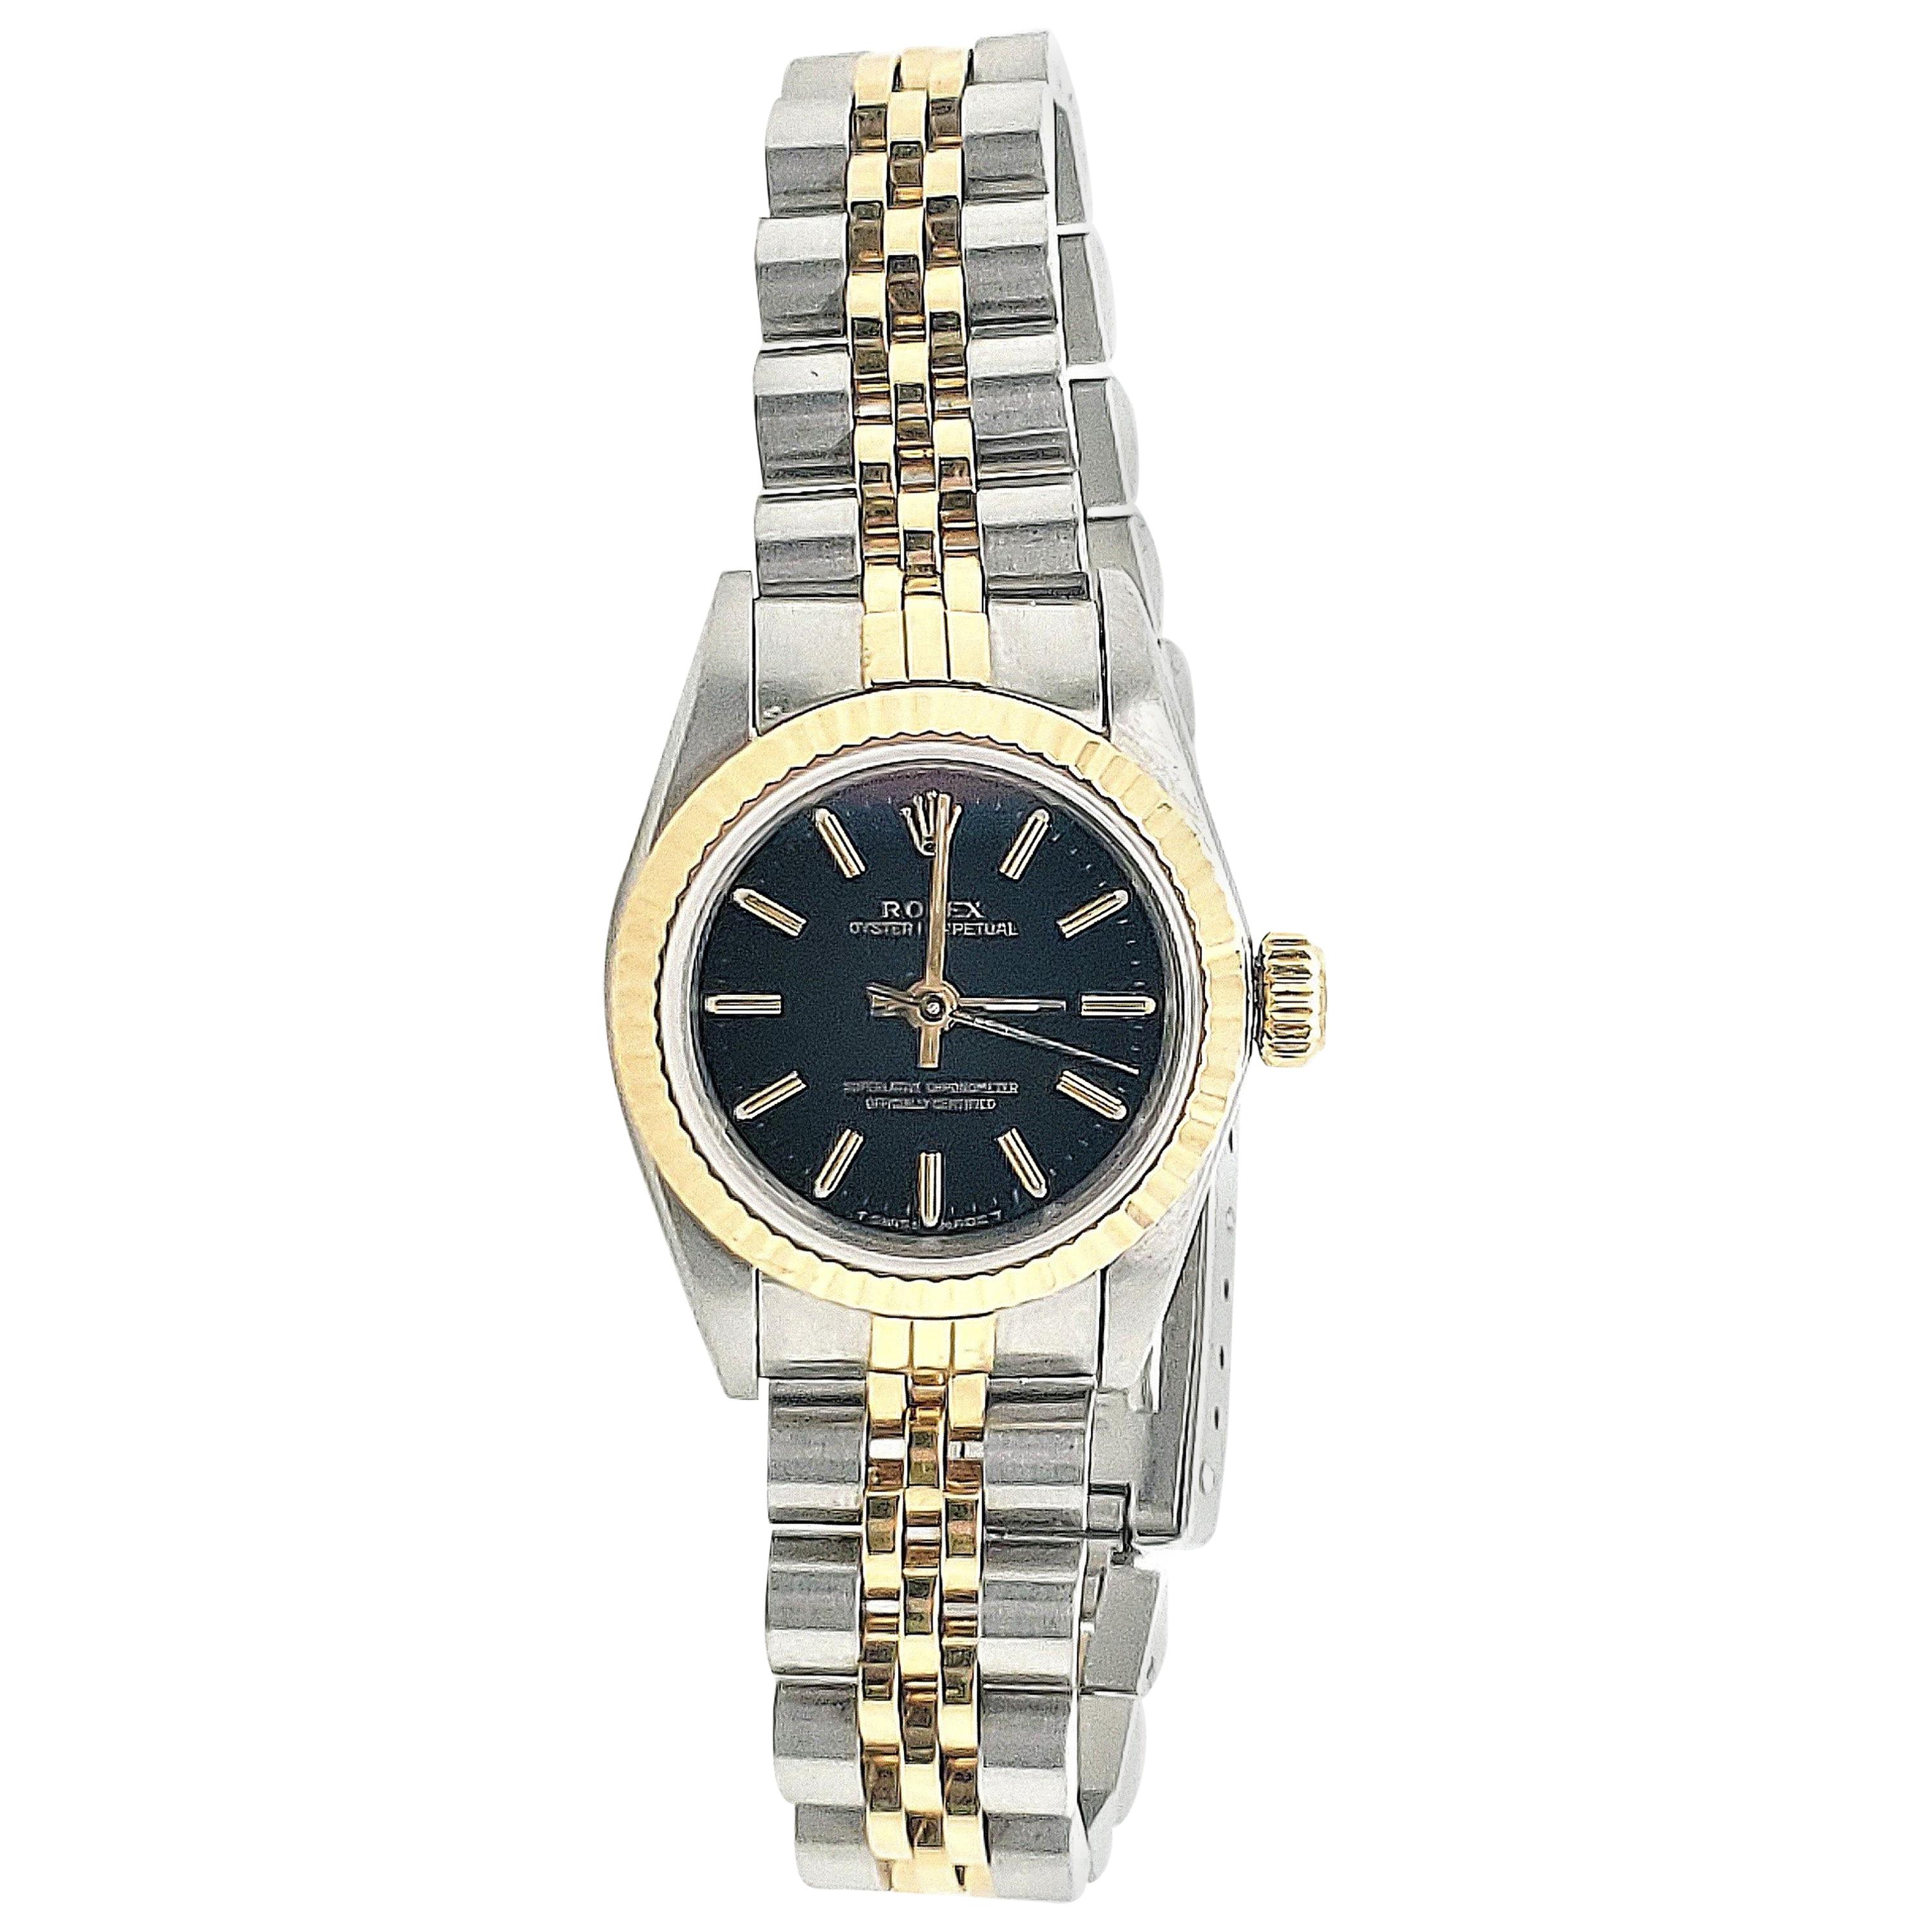 Stainless Steel and Gold Rolex Oyster Perpetual